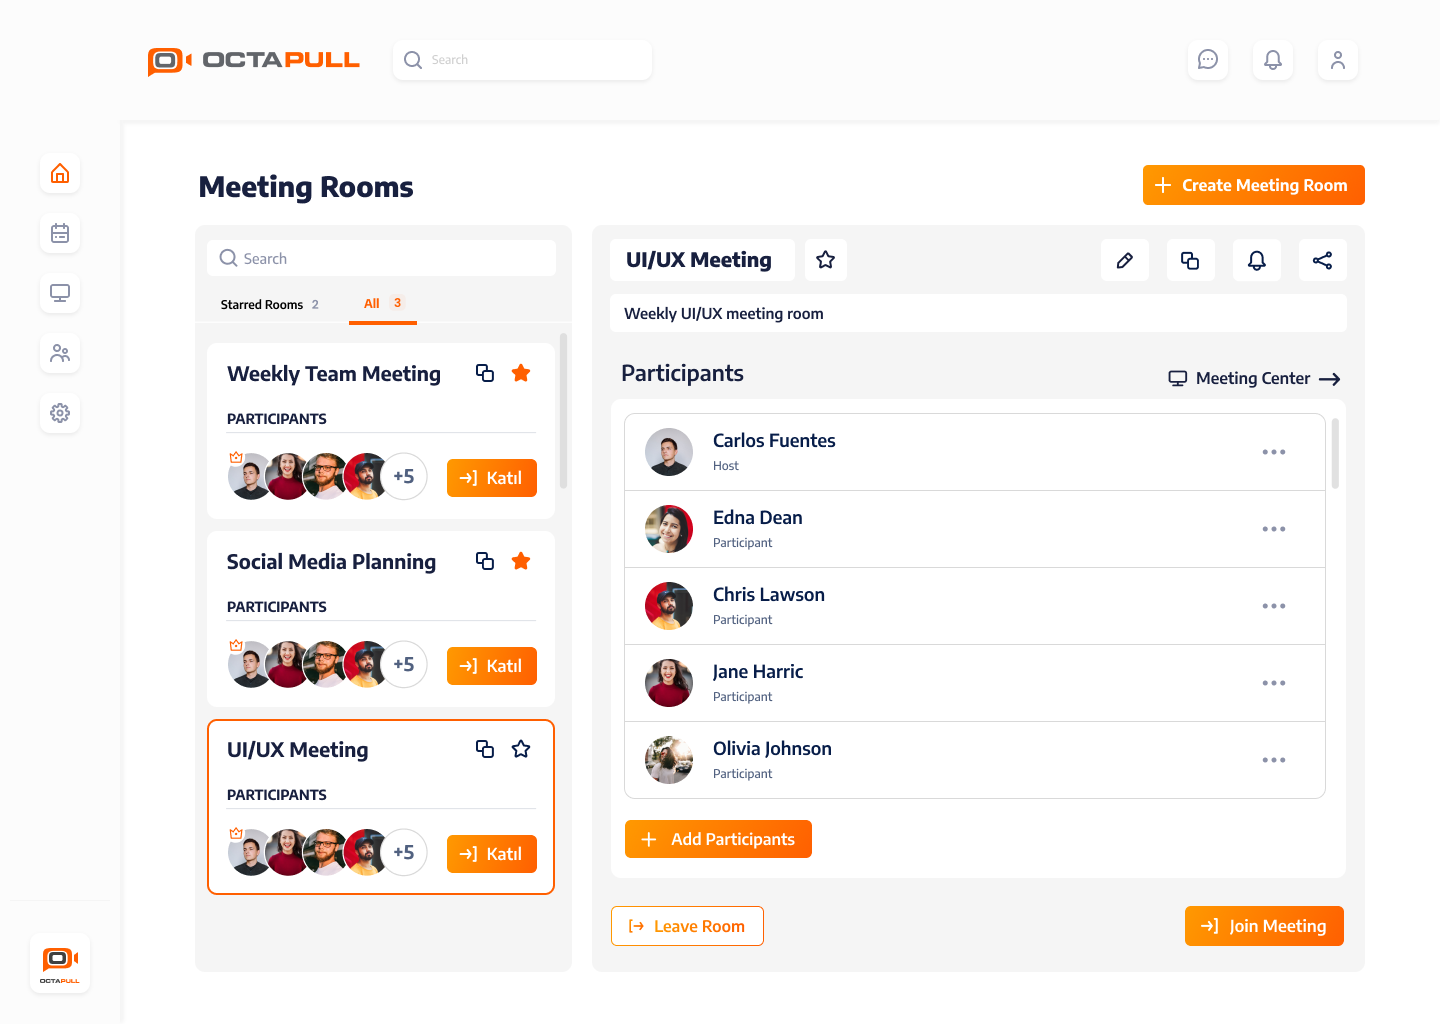 OCTAPULL Meeting Rooms